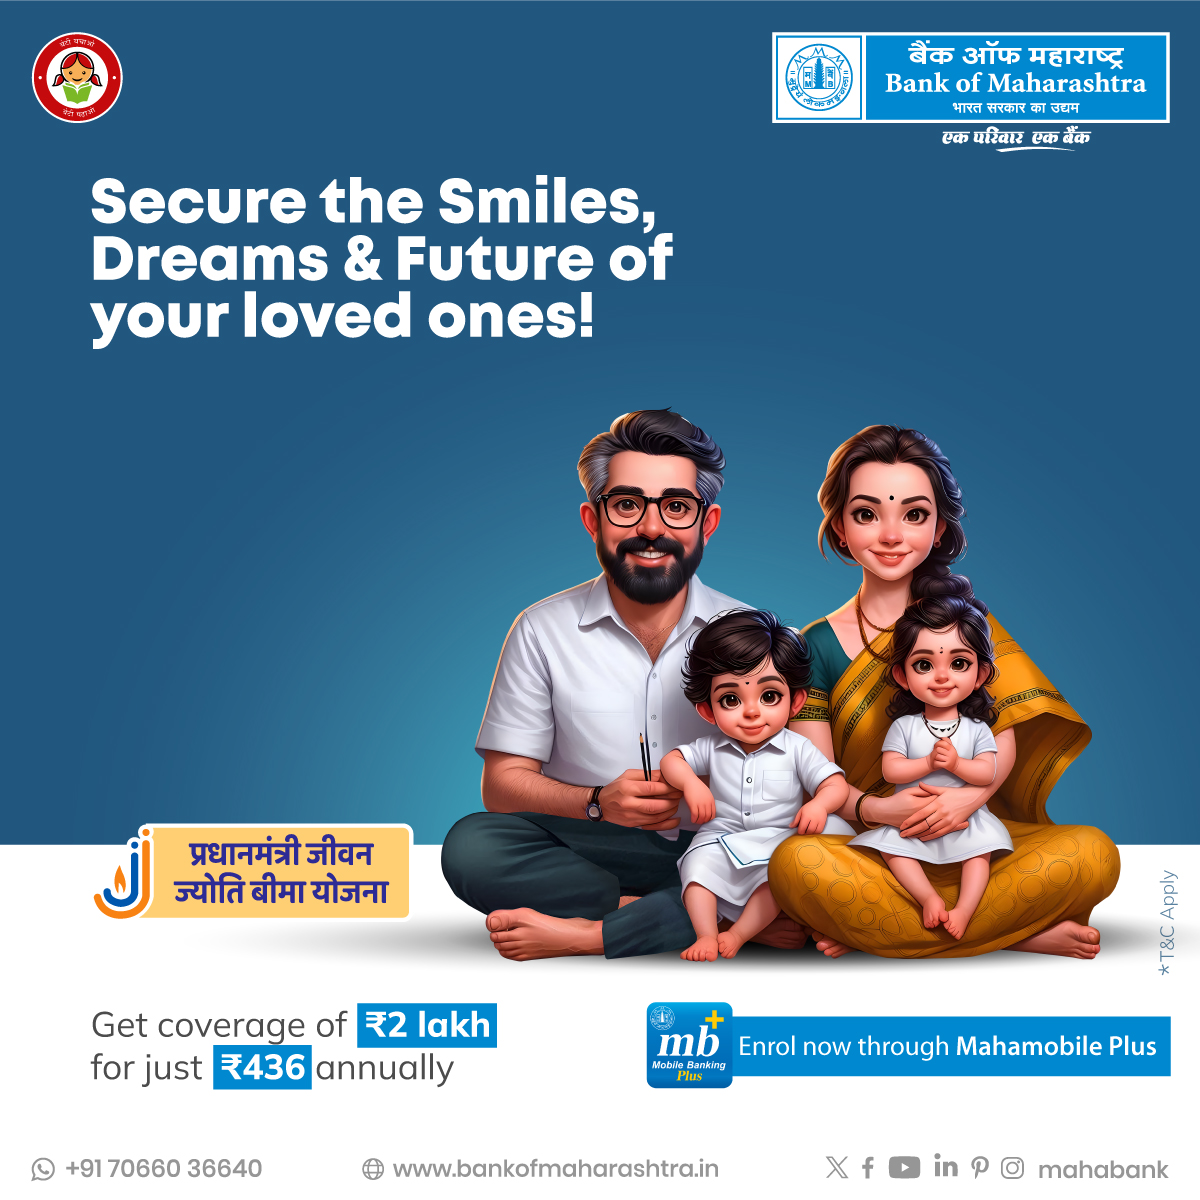 (1/2) Protect the future of your loved ones with Pradhan Mantri Jeevan Jyoti Bima Yojana (PMJJBY). Enjoy life insurance coverage of up to ₹2 lakh for an affordable annual premium of just ₹436. Enroll effortlessly with the Mahamobile Plus App today!